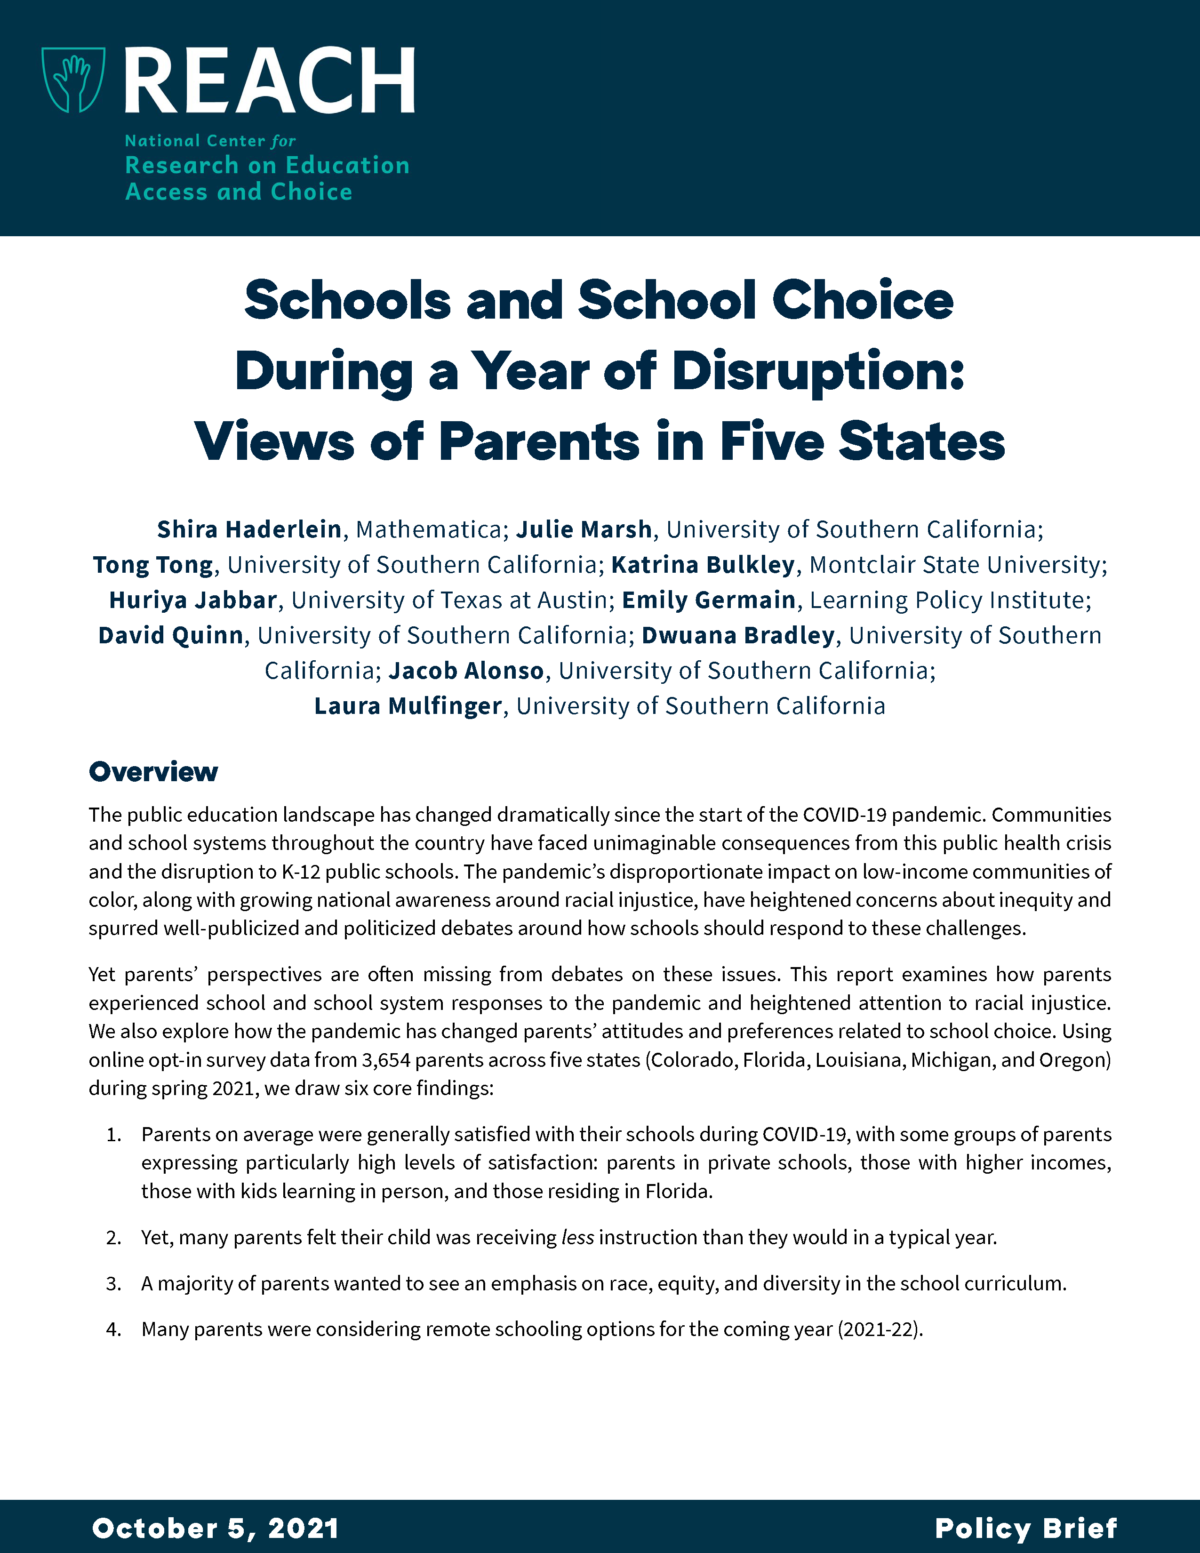 20211005 Haderlein et al Schools and school choice during a year of disruption Views of parents in five states Cover